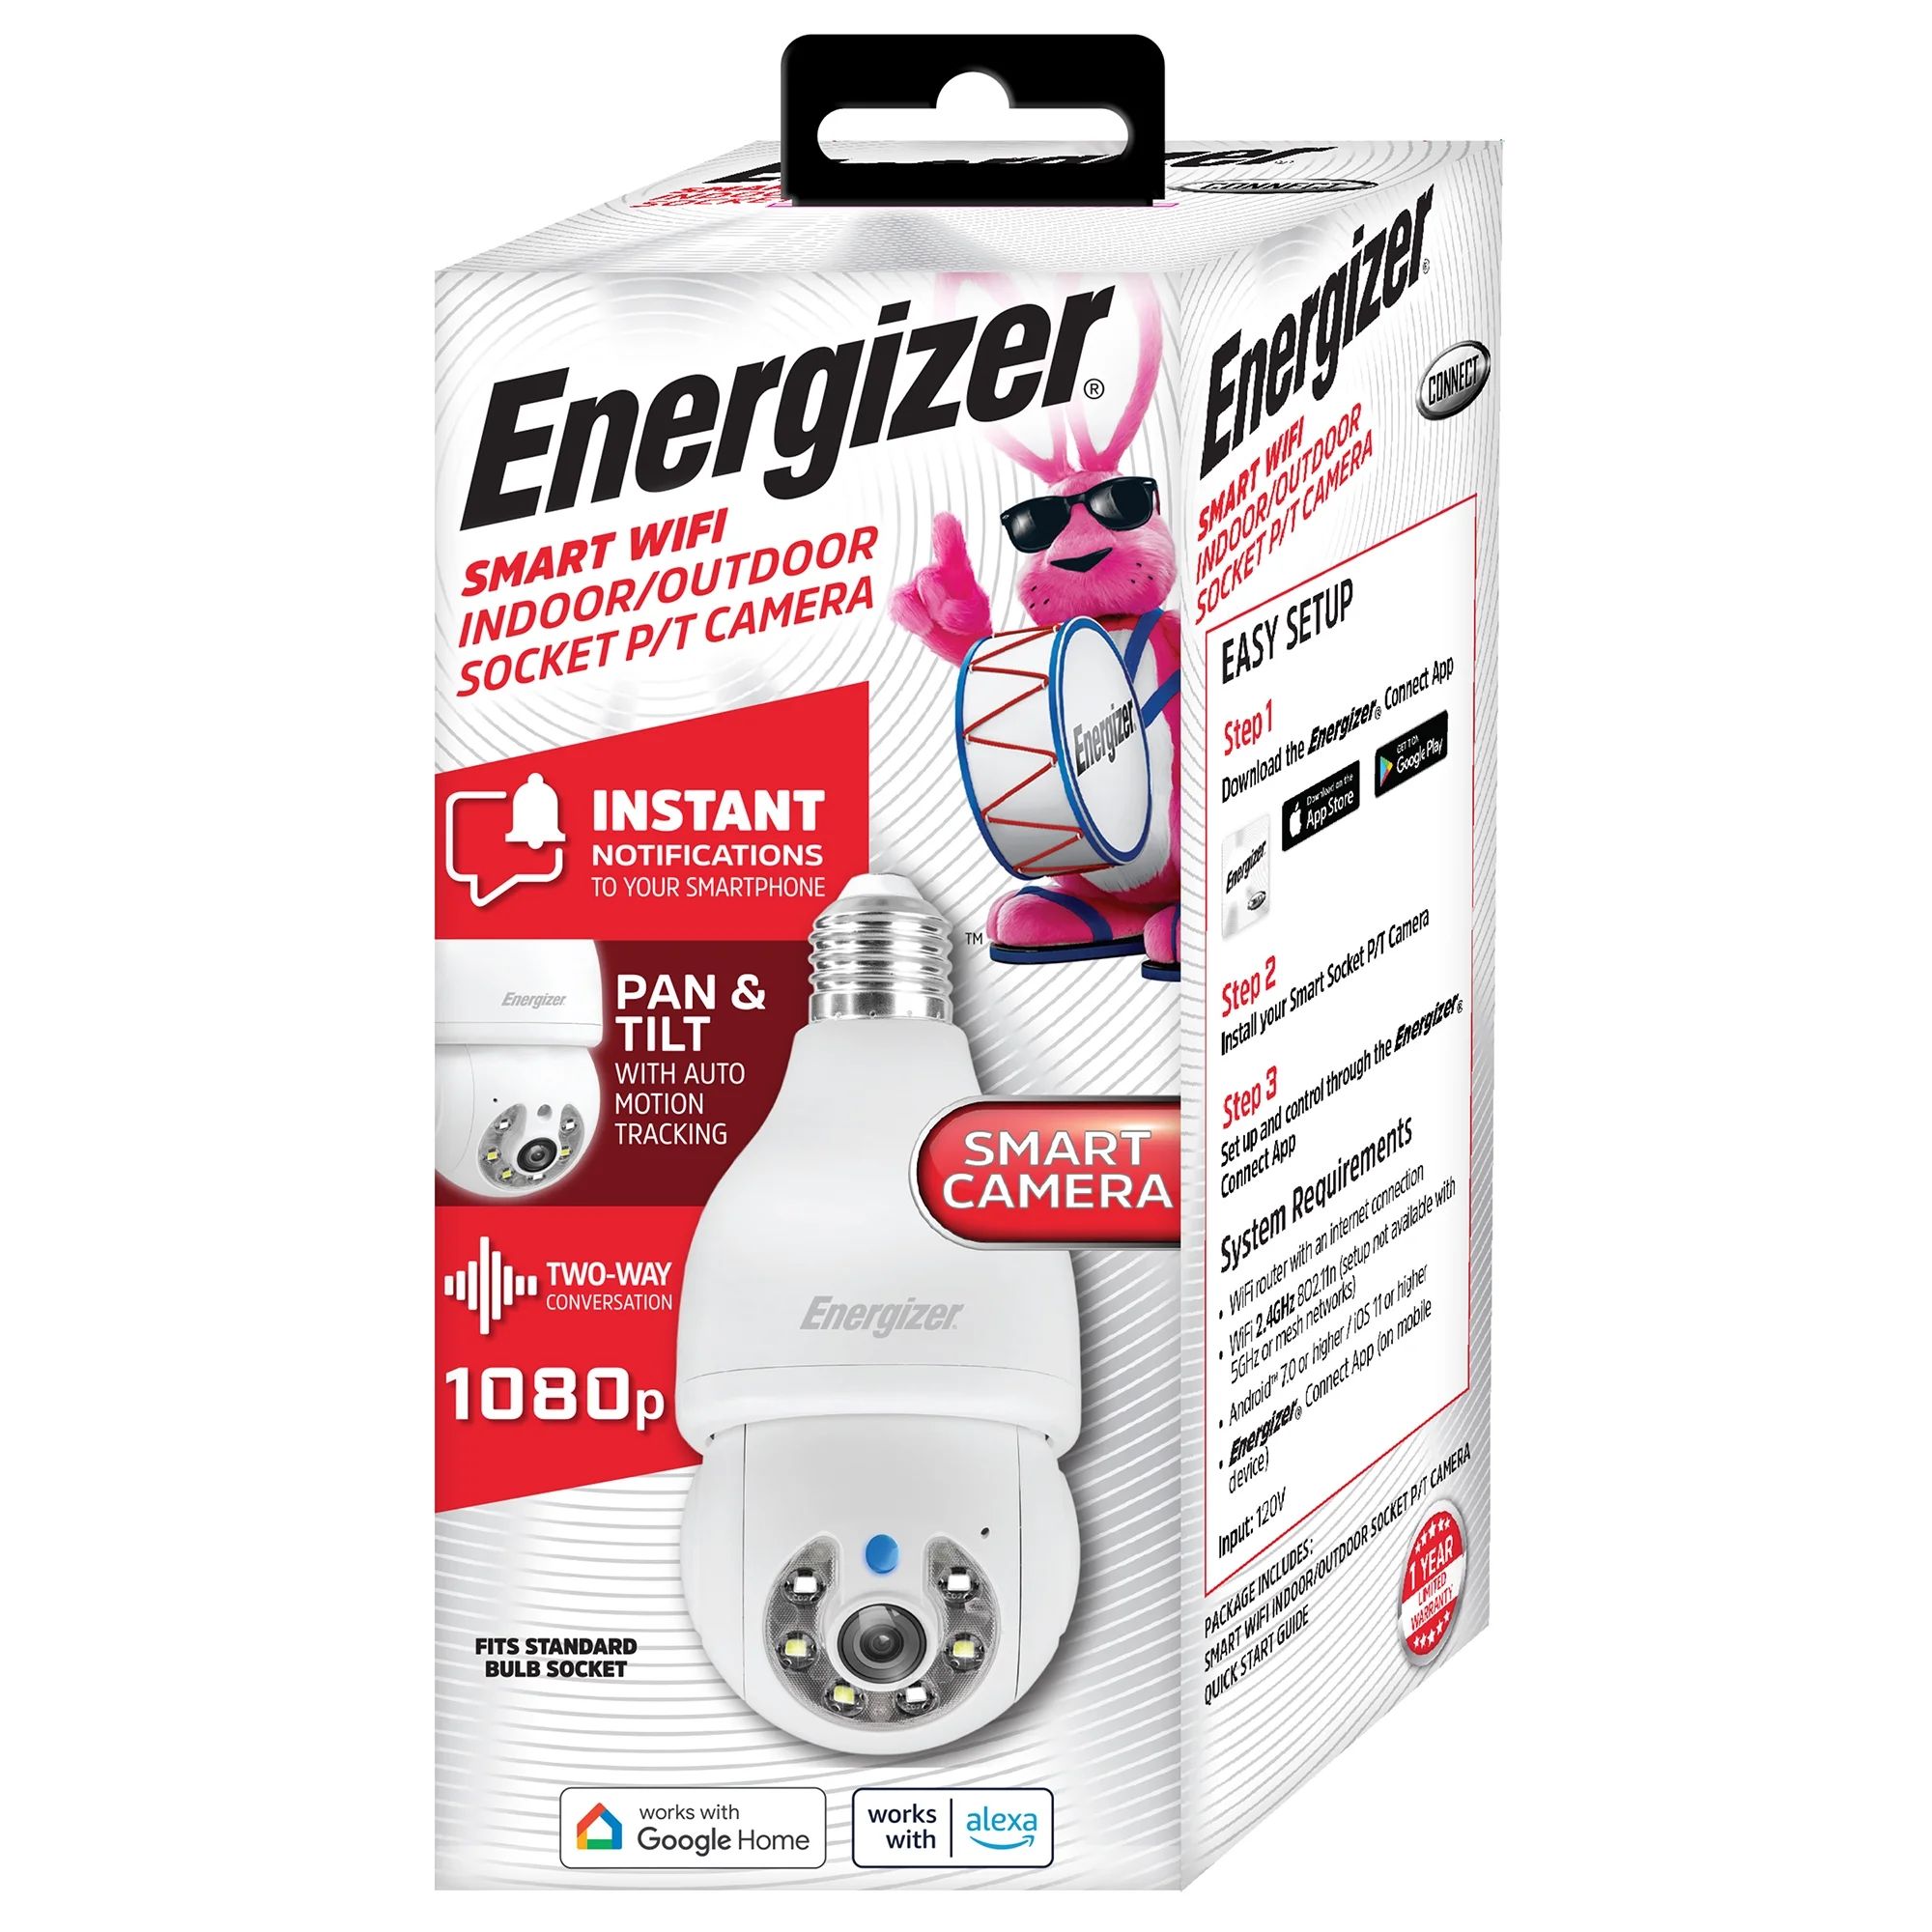 Energizer Smart Outdoor 1080p Security Socket Camera with Auto Motion tracking, 2-Way Audio, Nigh... | Walmart (US)